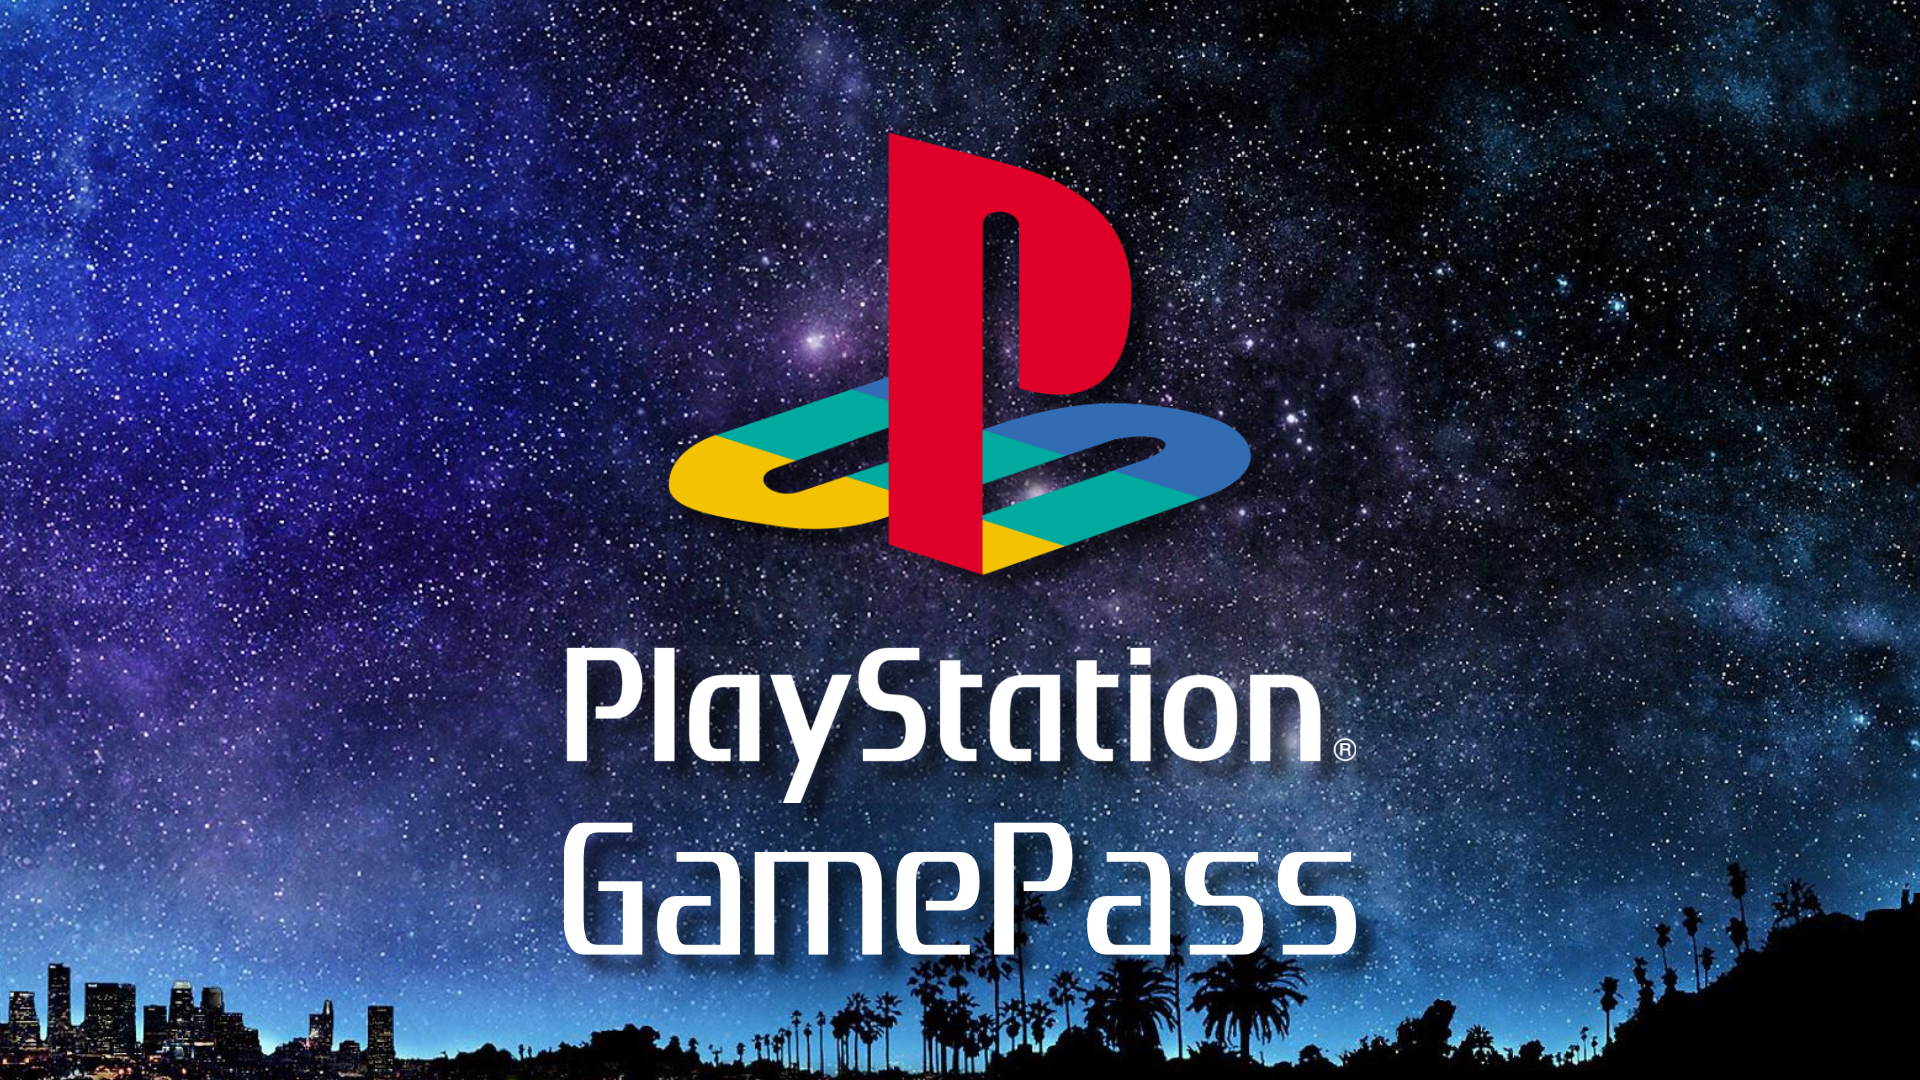 PlayStation's Game Pass competitor continues to sound disappointing